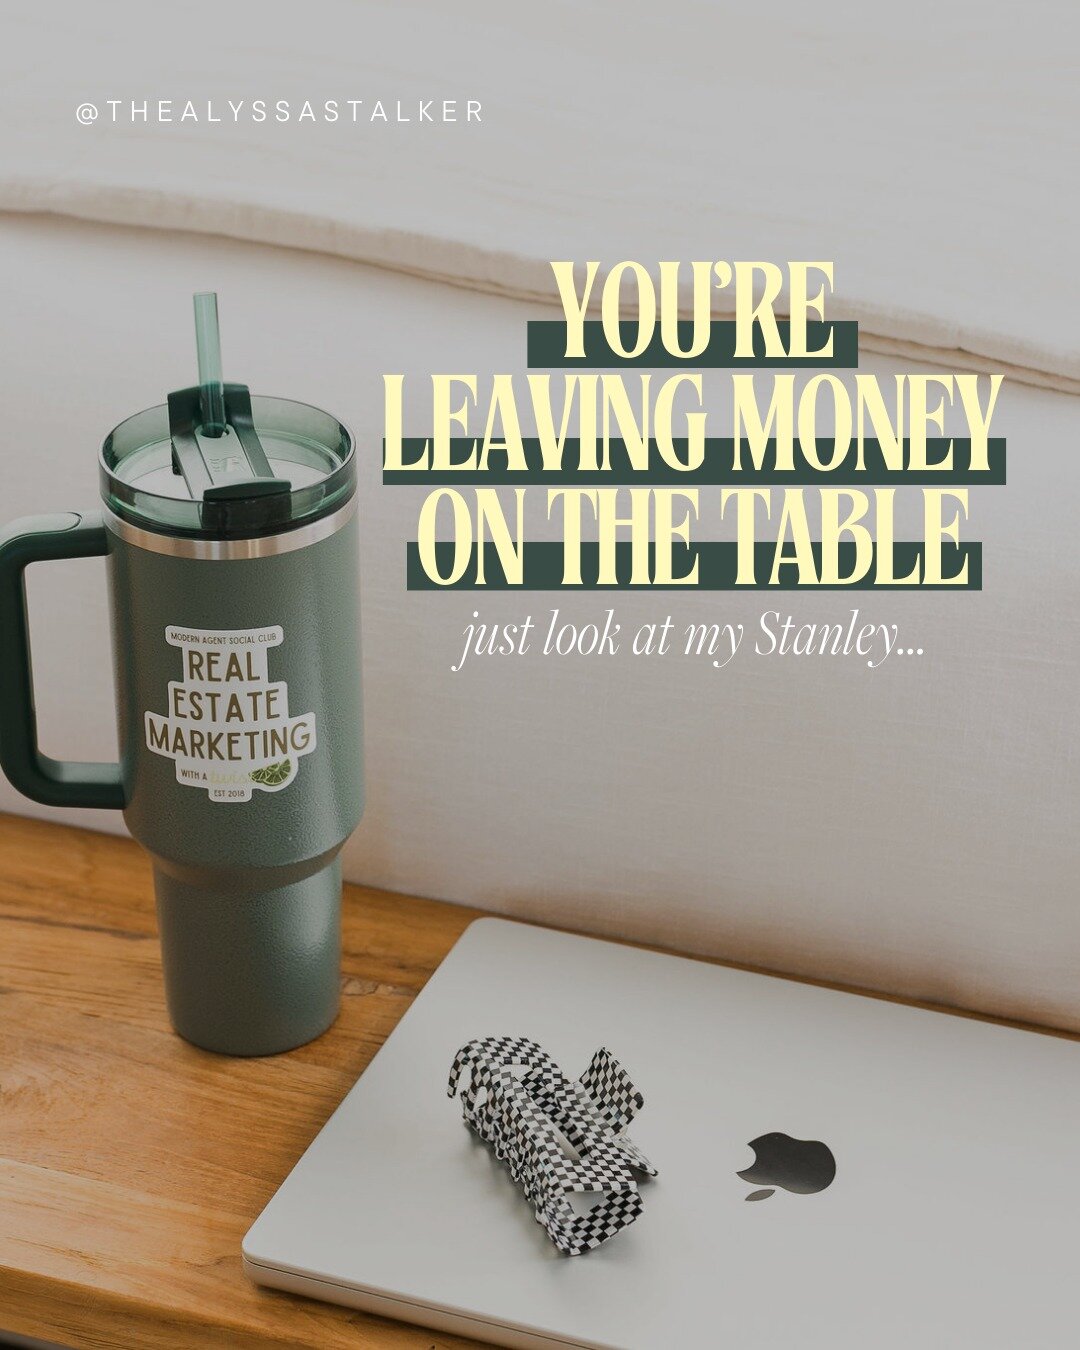 IF YOUR STANLEY COULD TALK it would say two things ✌️

1 - Youneed me in another color! And...

2 - You can&rsquo;t afford to miss the mark when marketing your home.

And your Stanley would know.

The 40oz Stanley tumbler has been first hit the marke